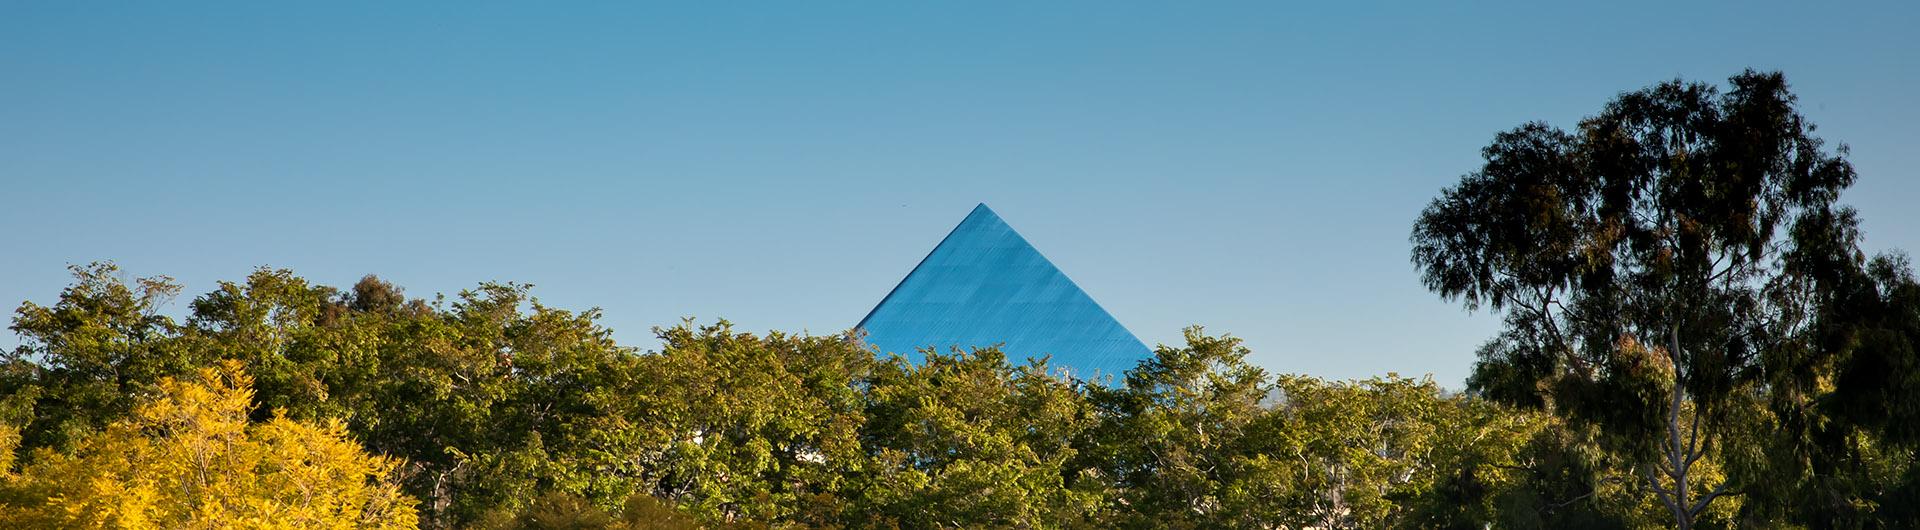 Pyramid behind a line of trees.